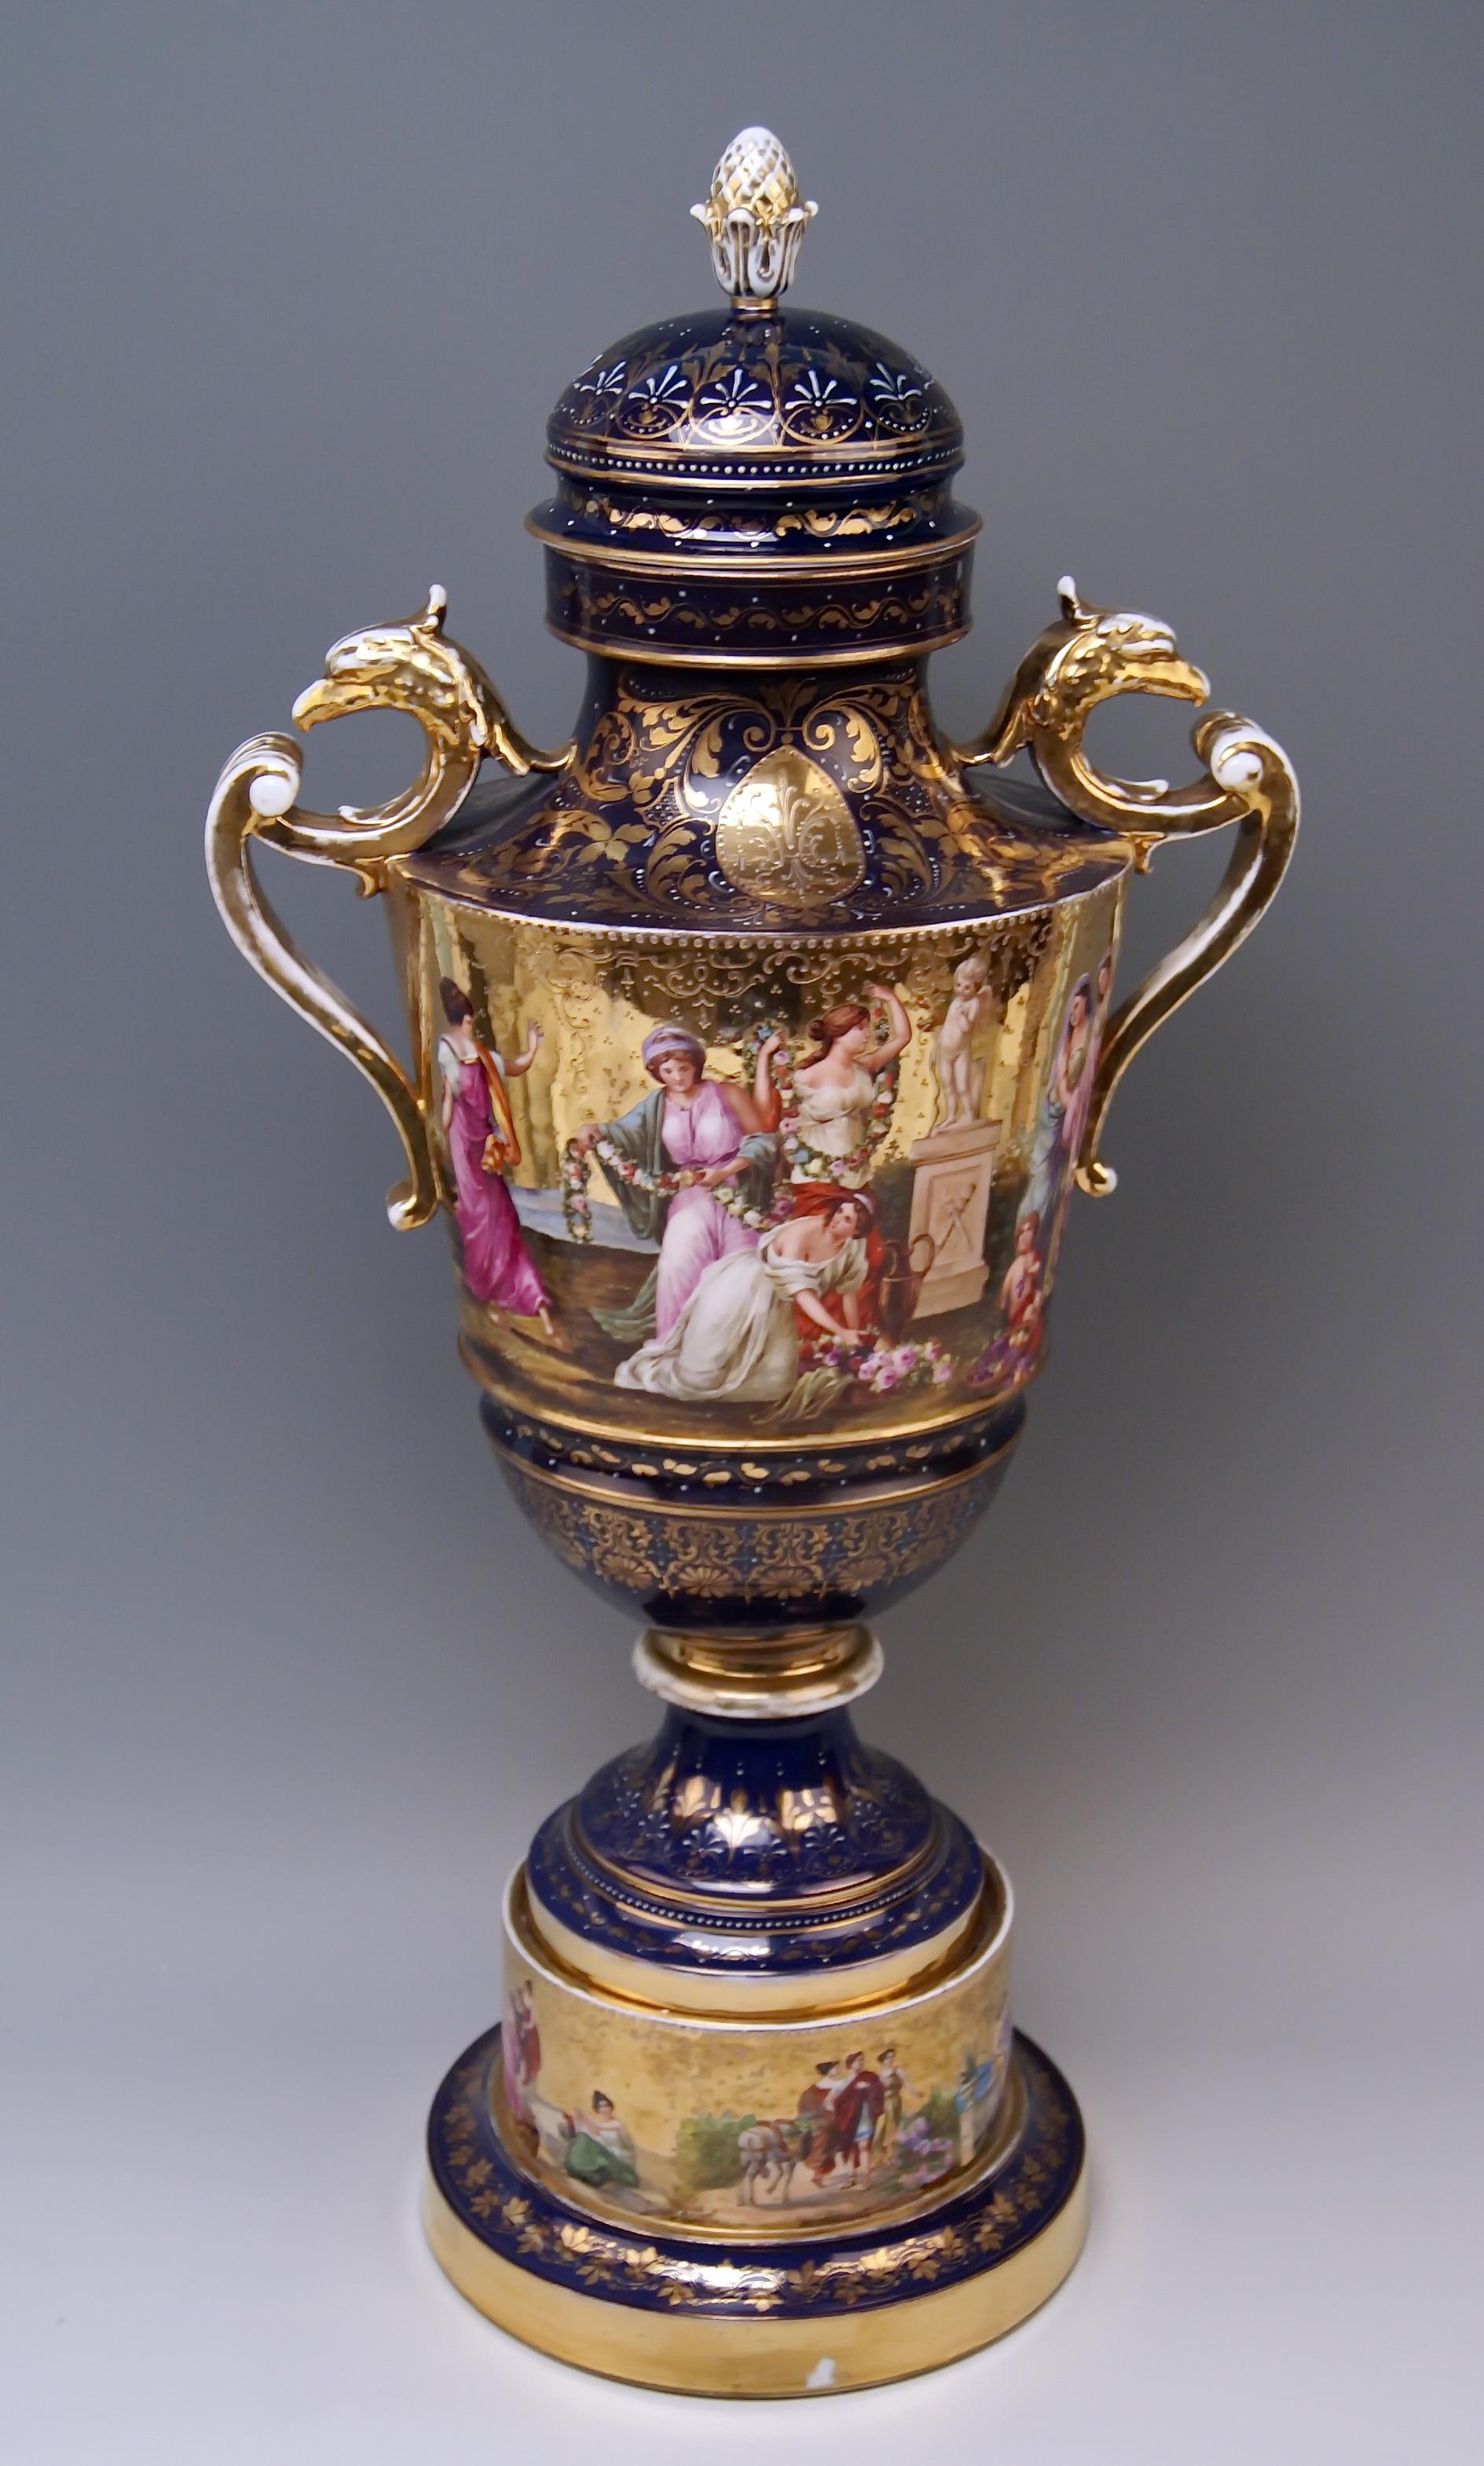 Gorgeous huge porcelain two-handled goblet, abundantly painted of Royal Vienna Porcelain Manufactory: Finest quality / the goblet's surface is covered with golden color on which various multicolored painted figurines deriving from ancient mythology